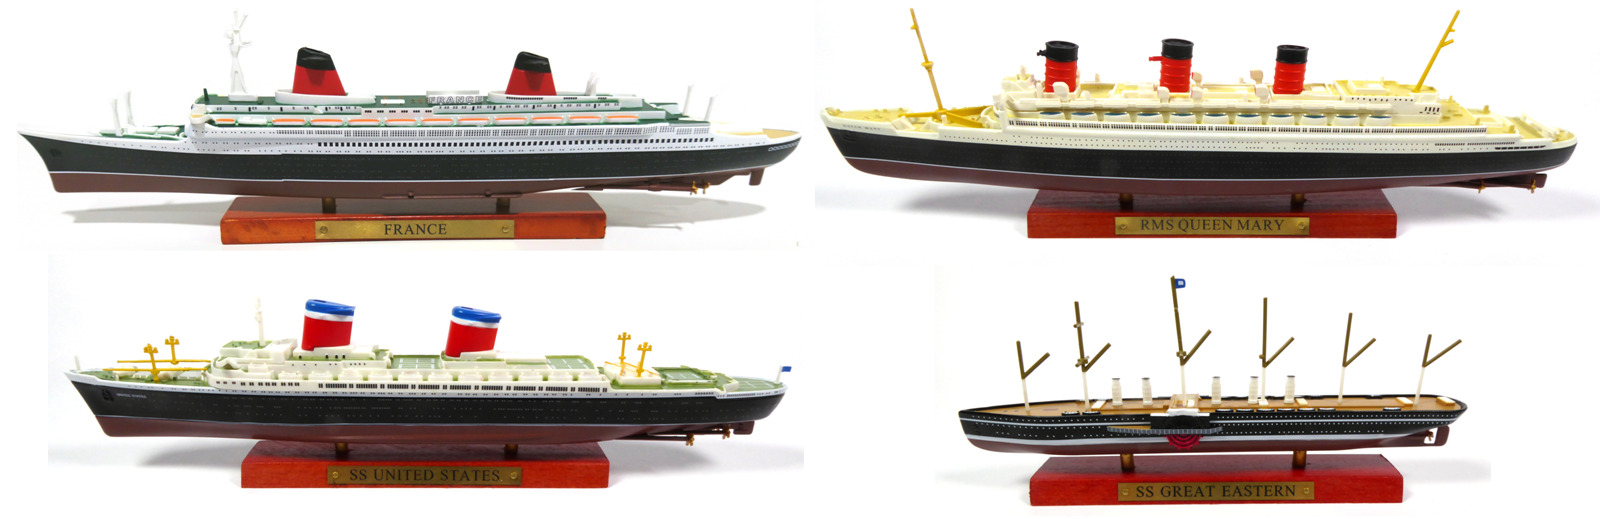 Set 4 Transatlantic Boats France+queen Mary+united States+great Eastern 1:1250